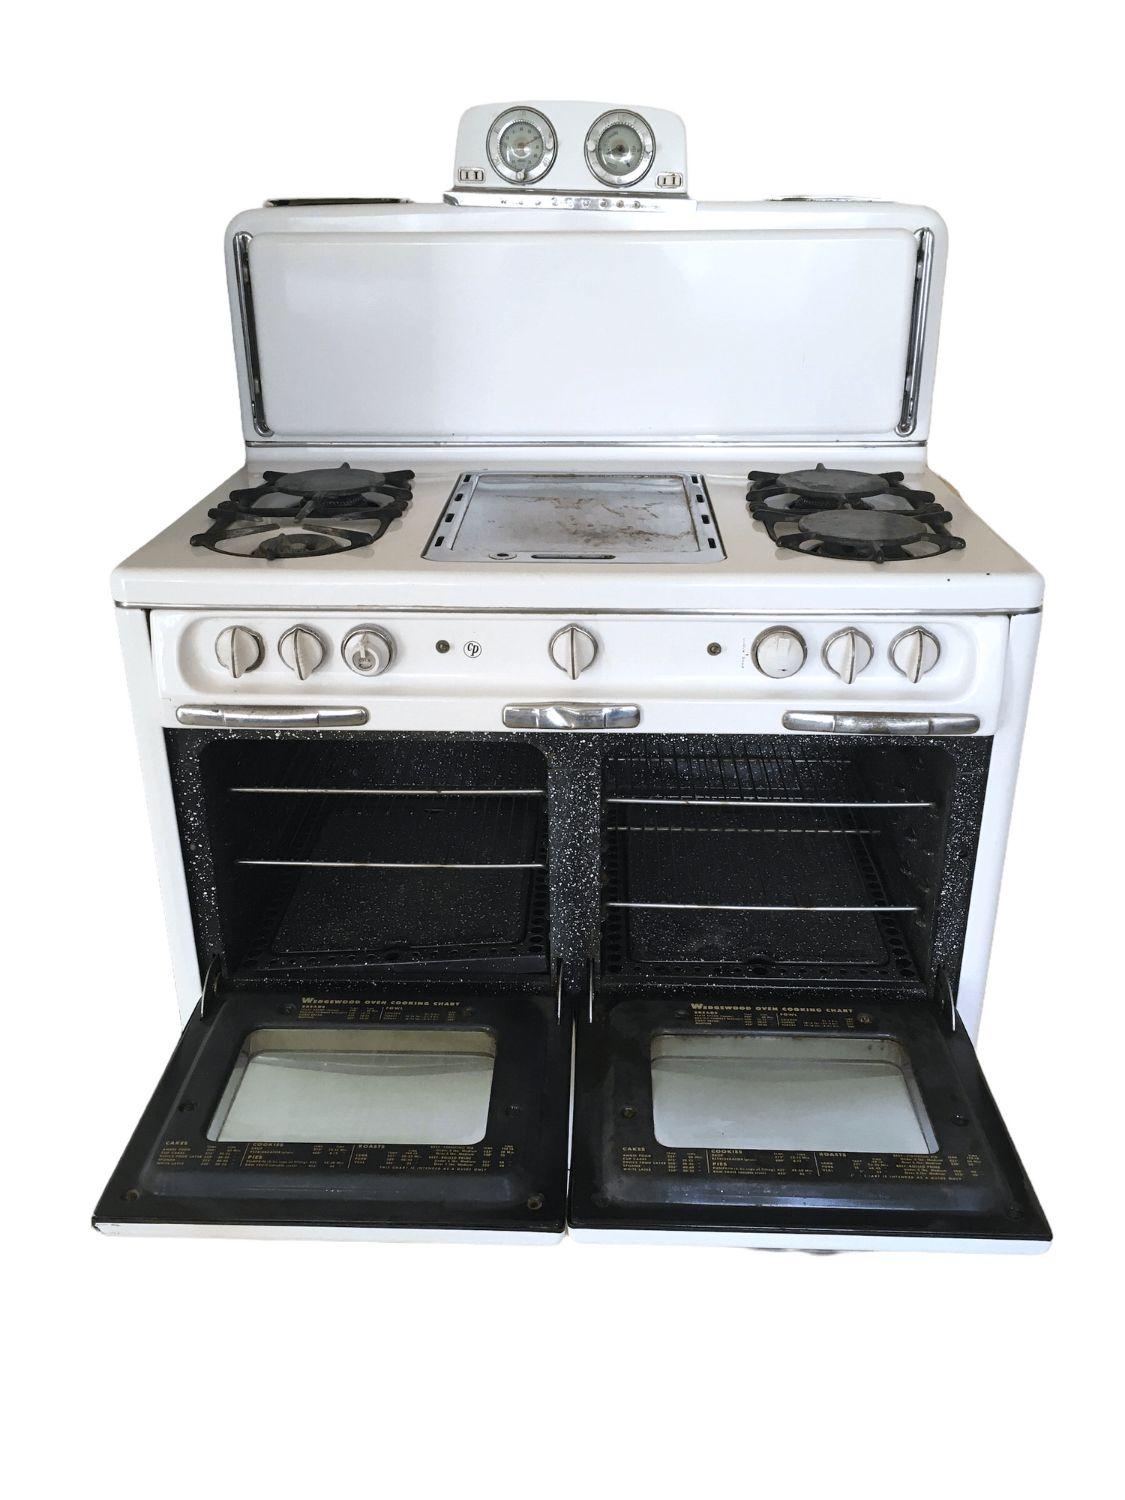 Vintage Wedgewood Double Oven Stove in White 1